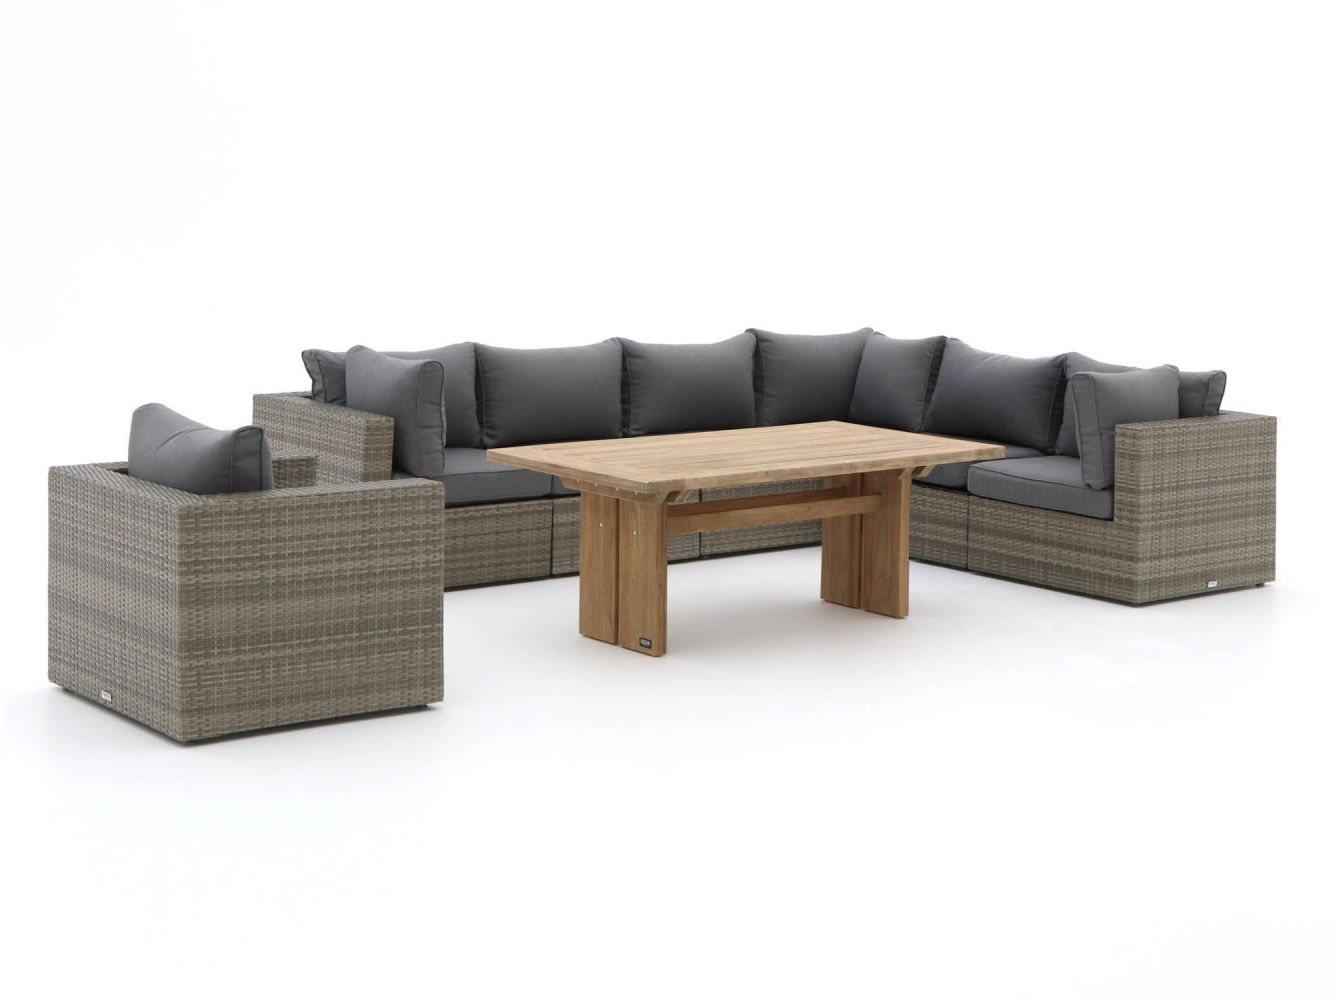 5953d3cef5085599ae9d08211a67831e84fd6b8c 114734 p01 dr4eobzuqjkzdxbl - Forza Barolo/ROUGH-L dining loungeset 8-delig